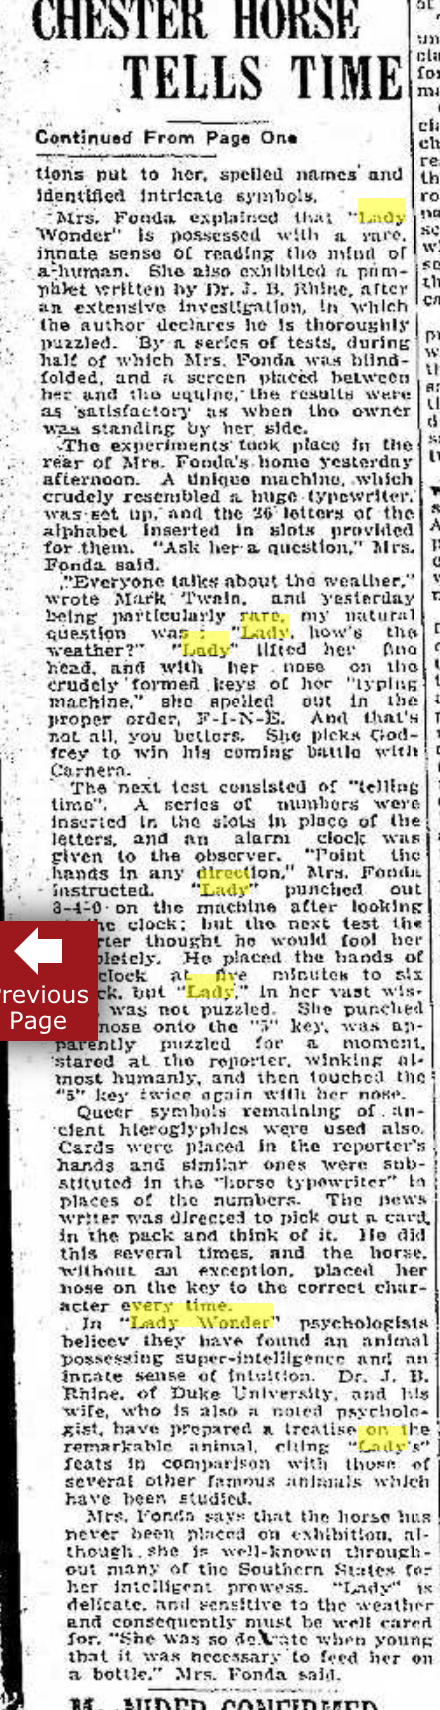 Chester Times June 21 1930 Pg2.png